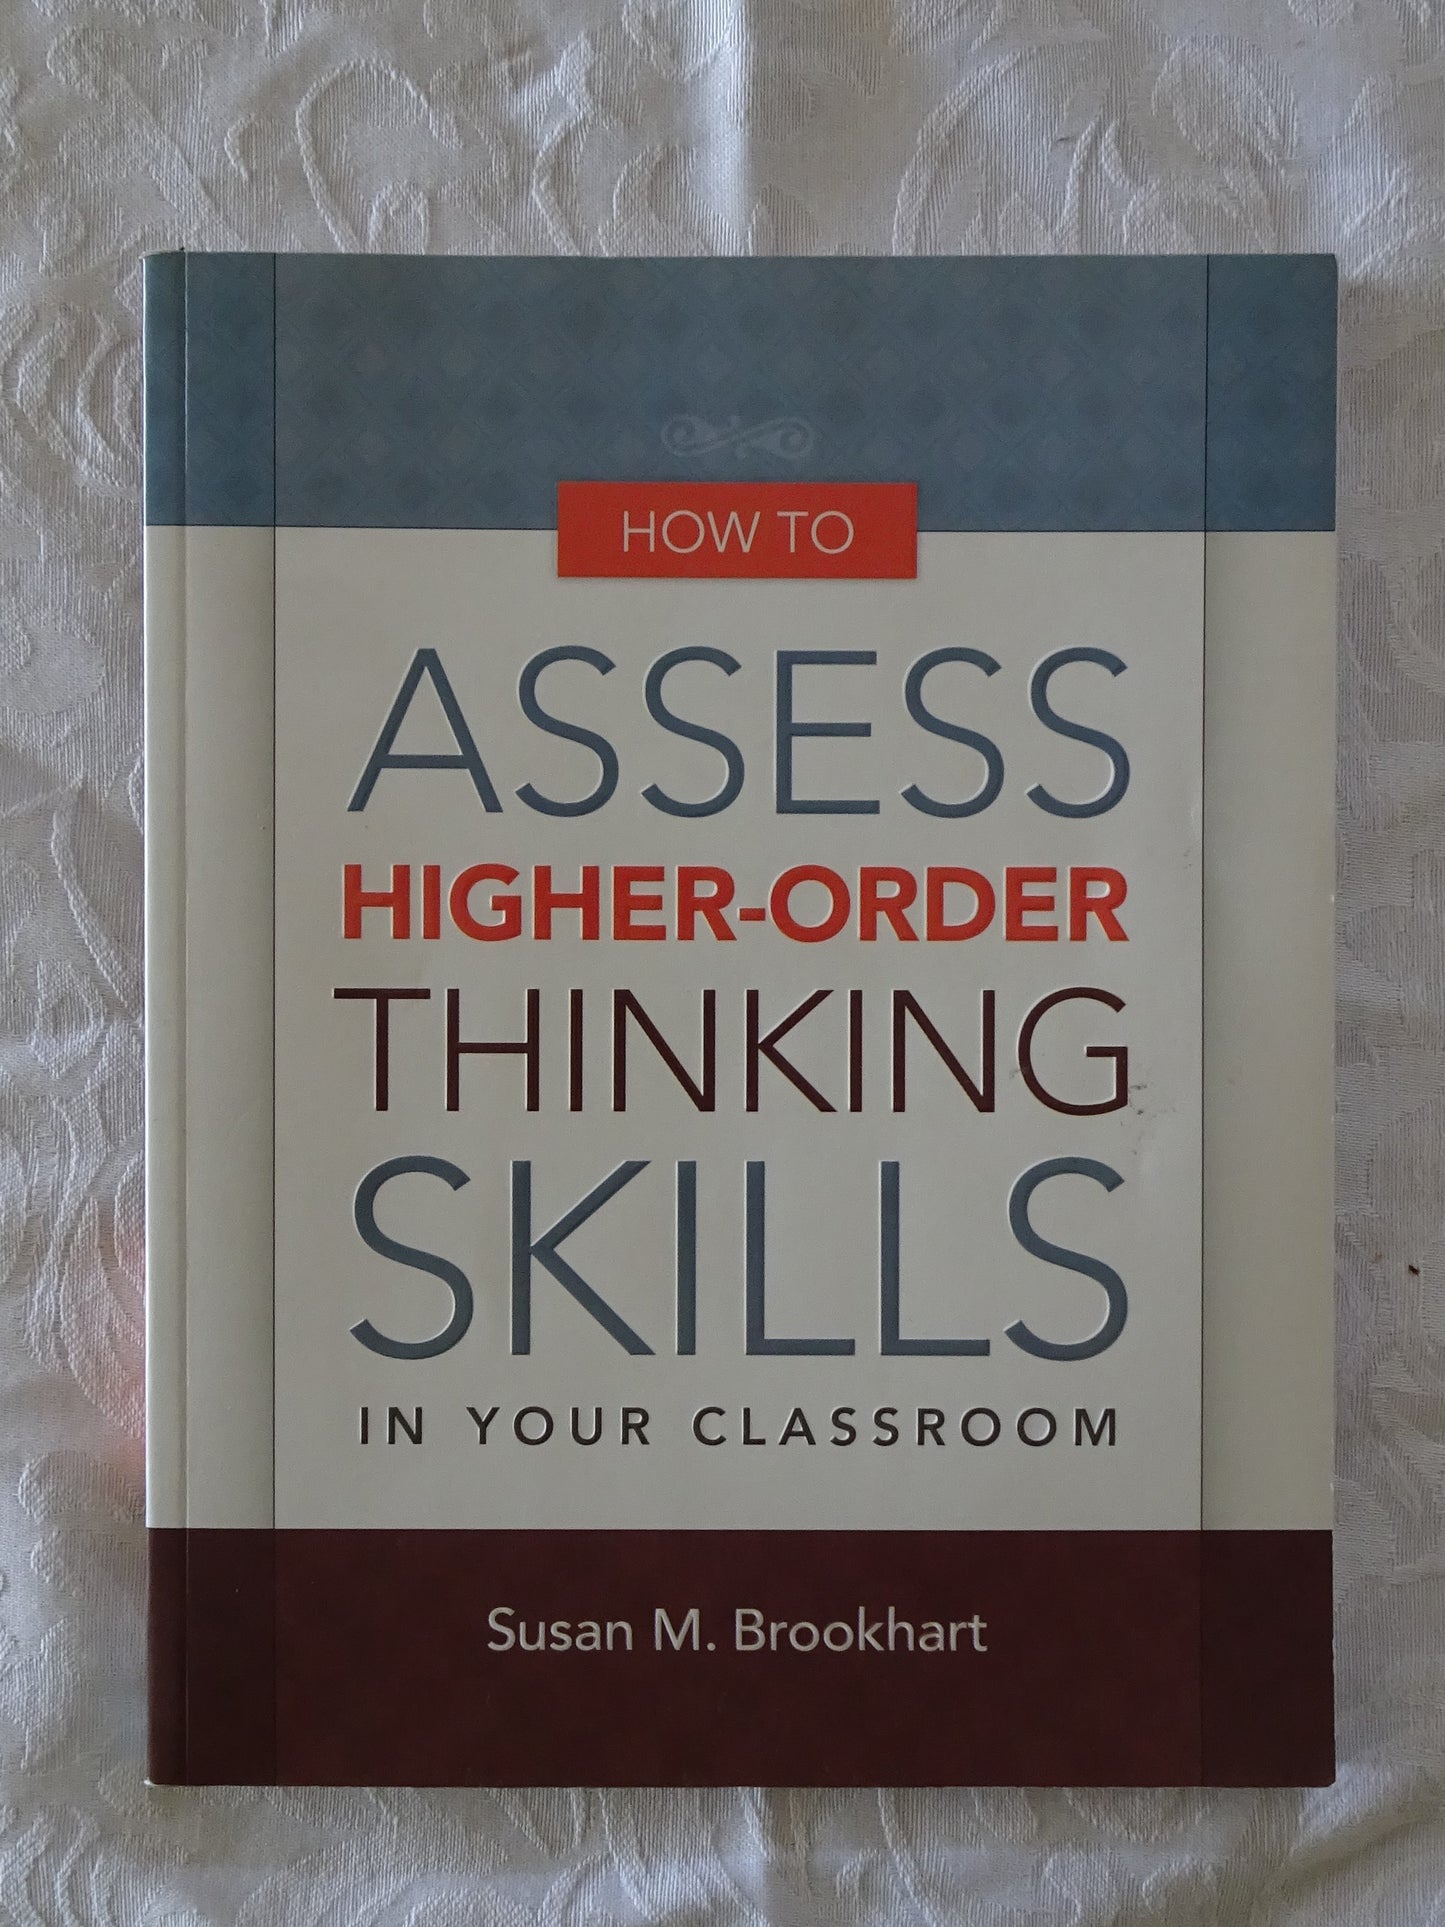 How To Assess Higher-Order Thinking Skills In Your Classroom by Susan M. Brookhart